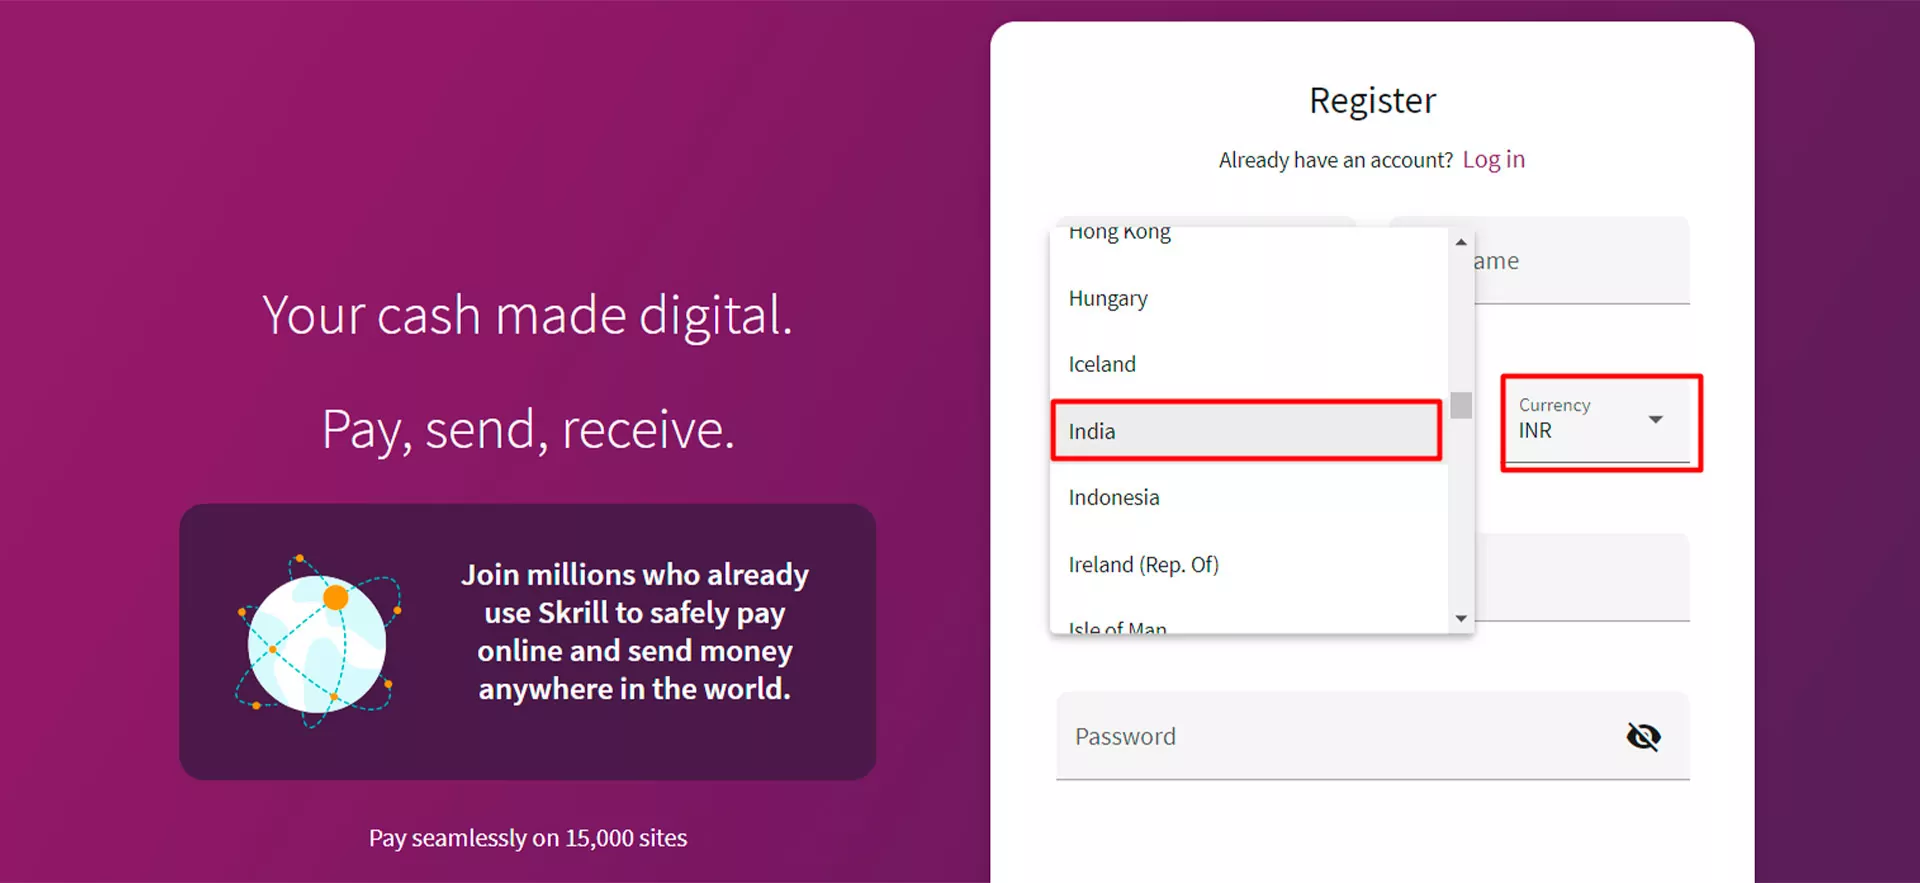 You can choose Indian Rupees for financial operations in Skrill.